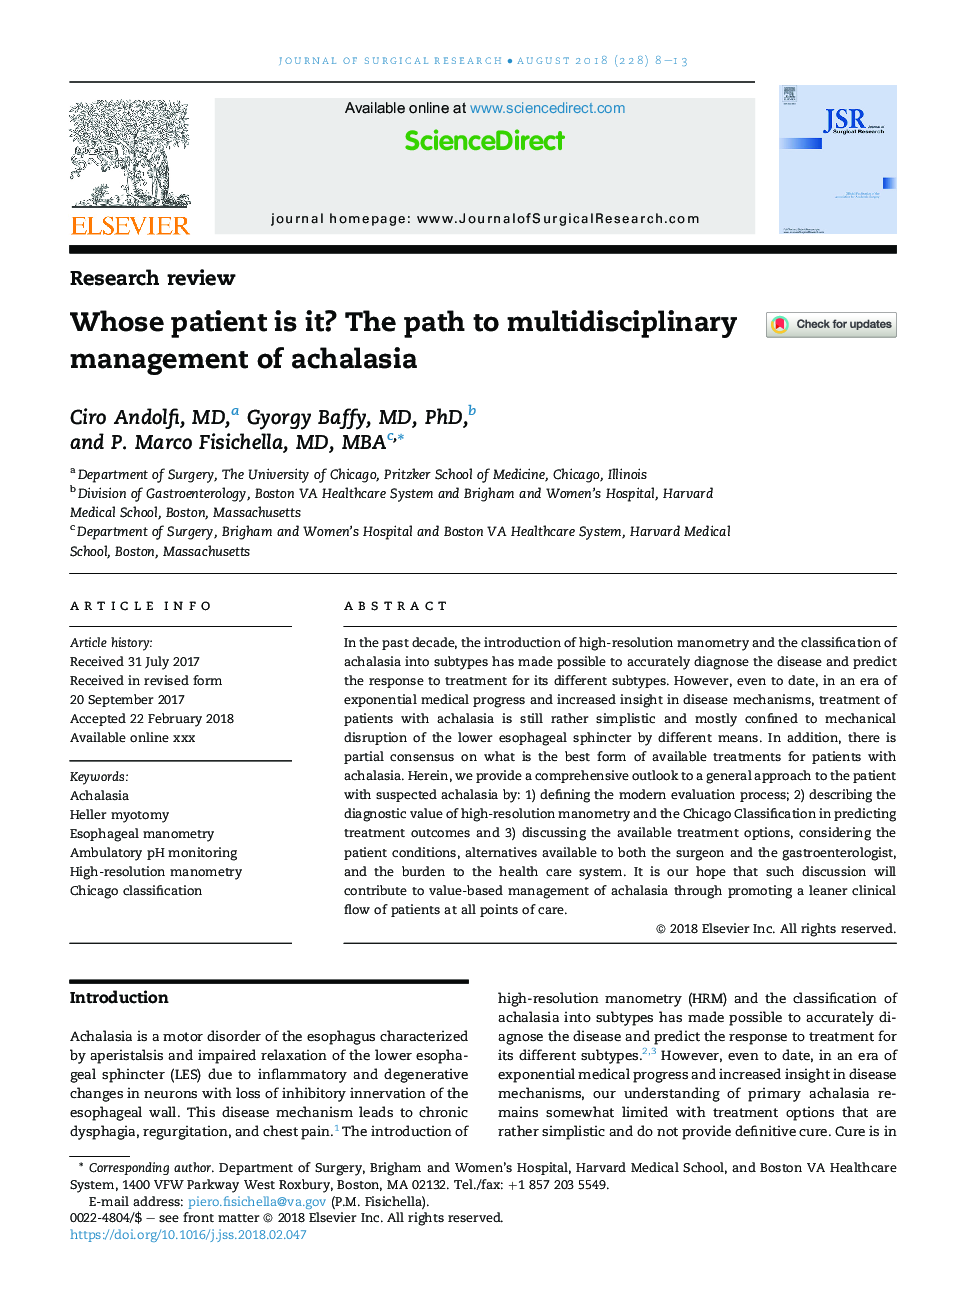 Whose patient is it? The path to multidisciplinary management of achalasia